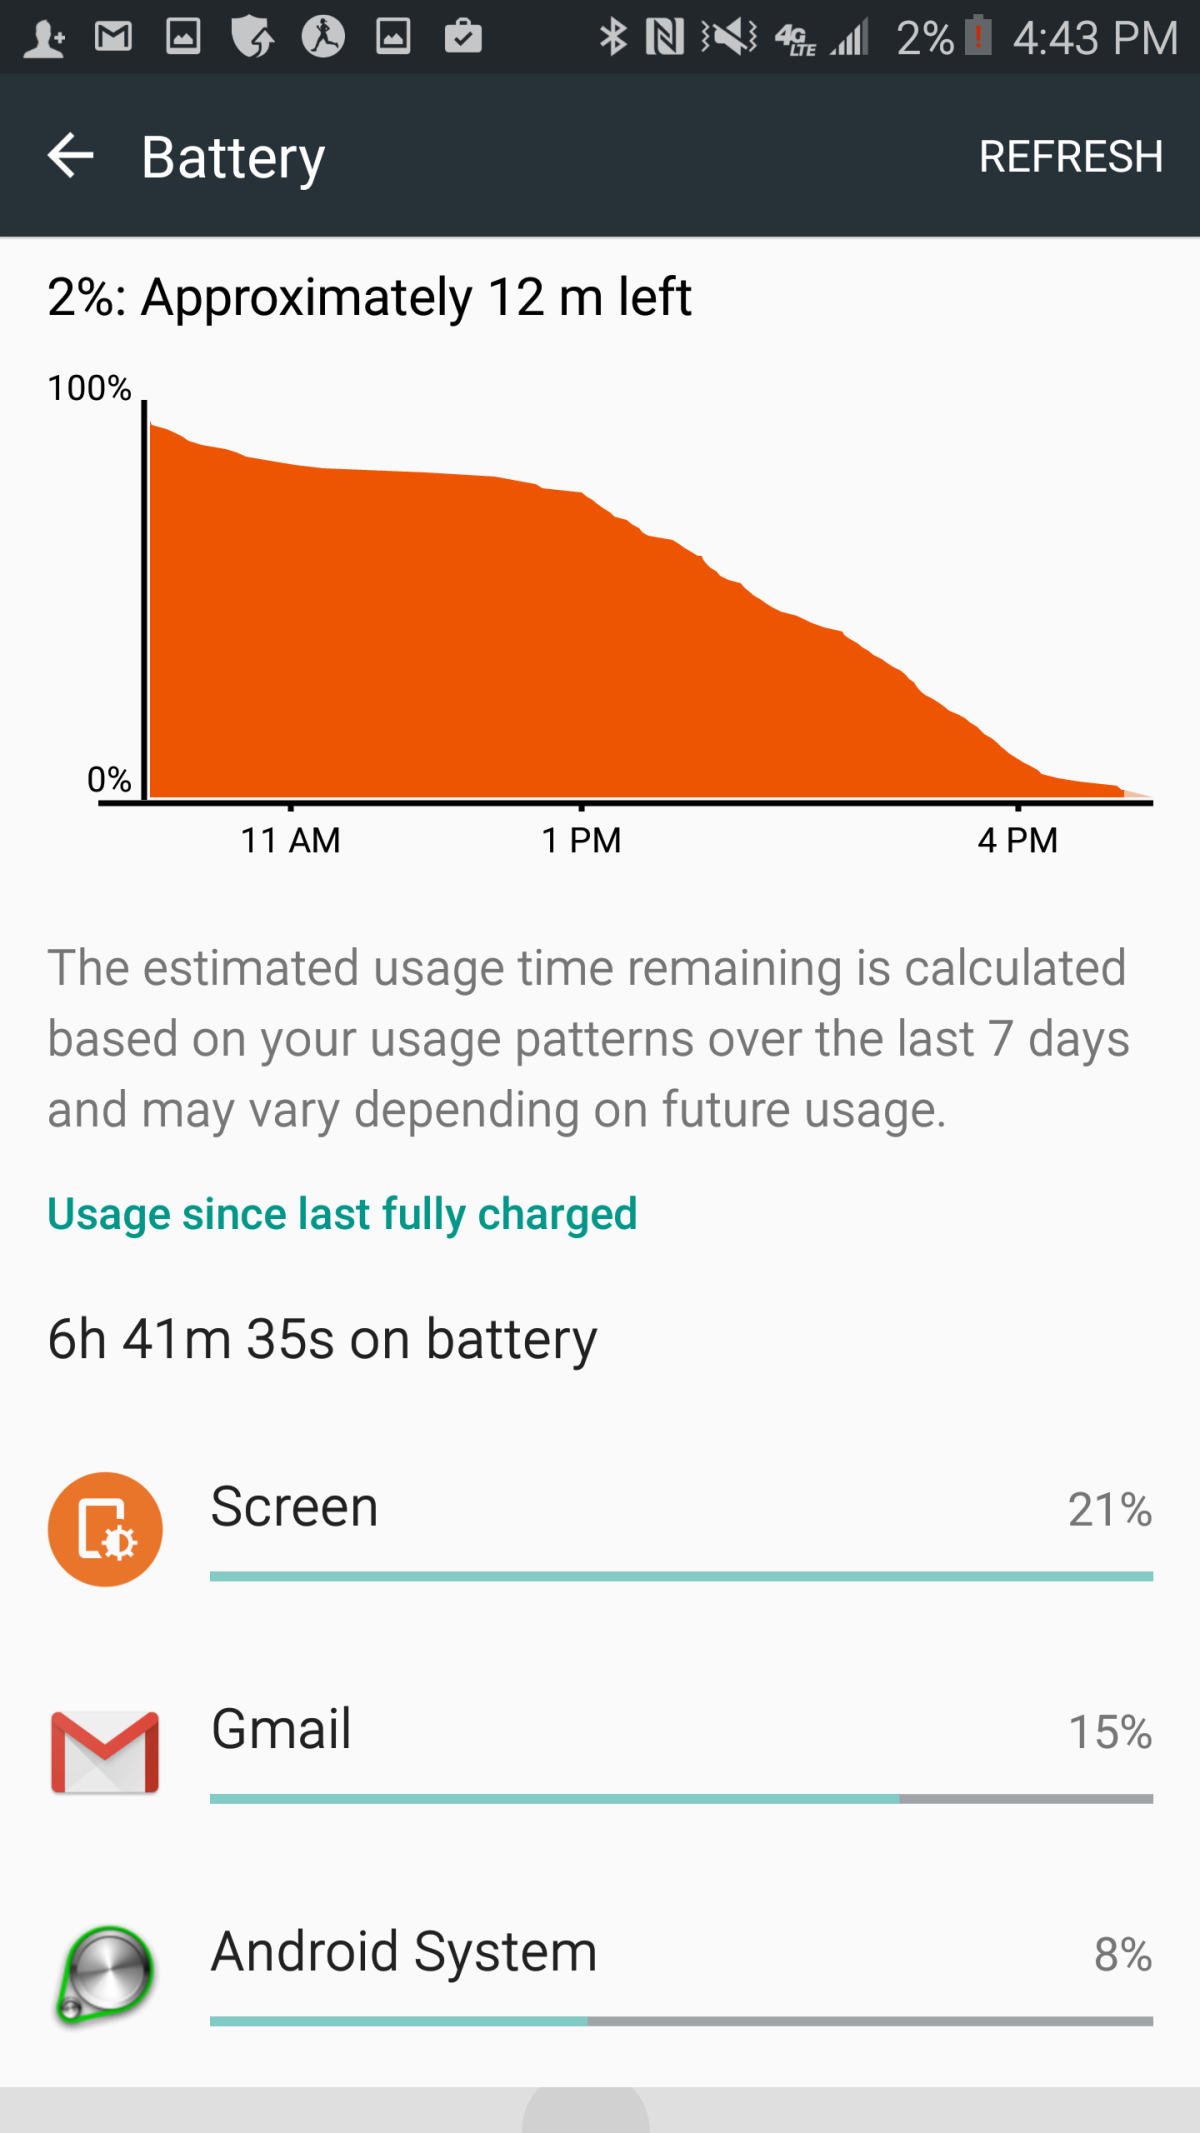 It seems to have been a fluke, but my first day had much worse battery.